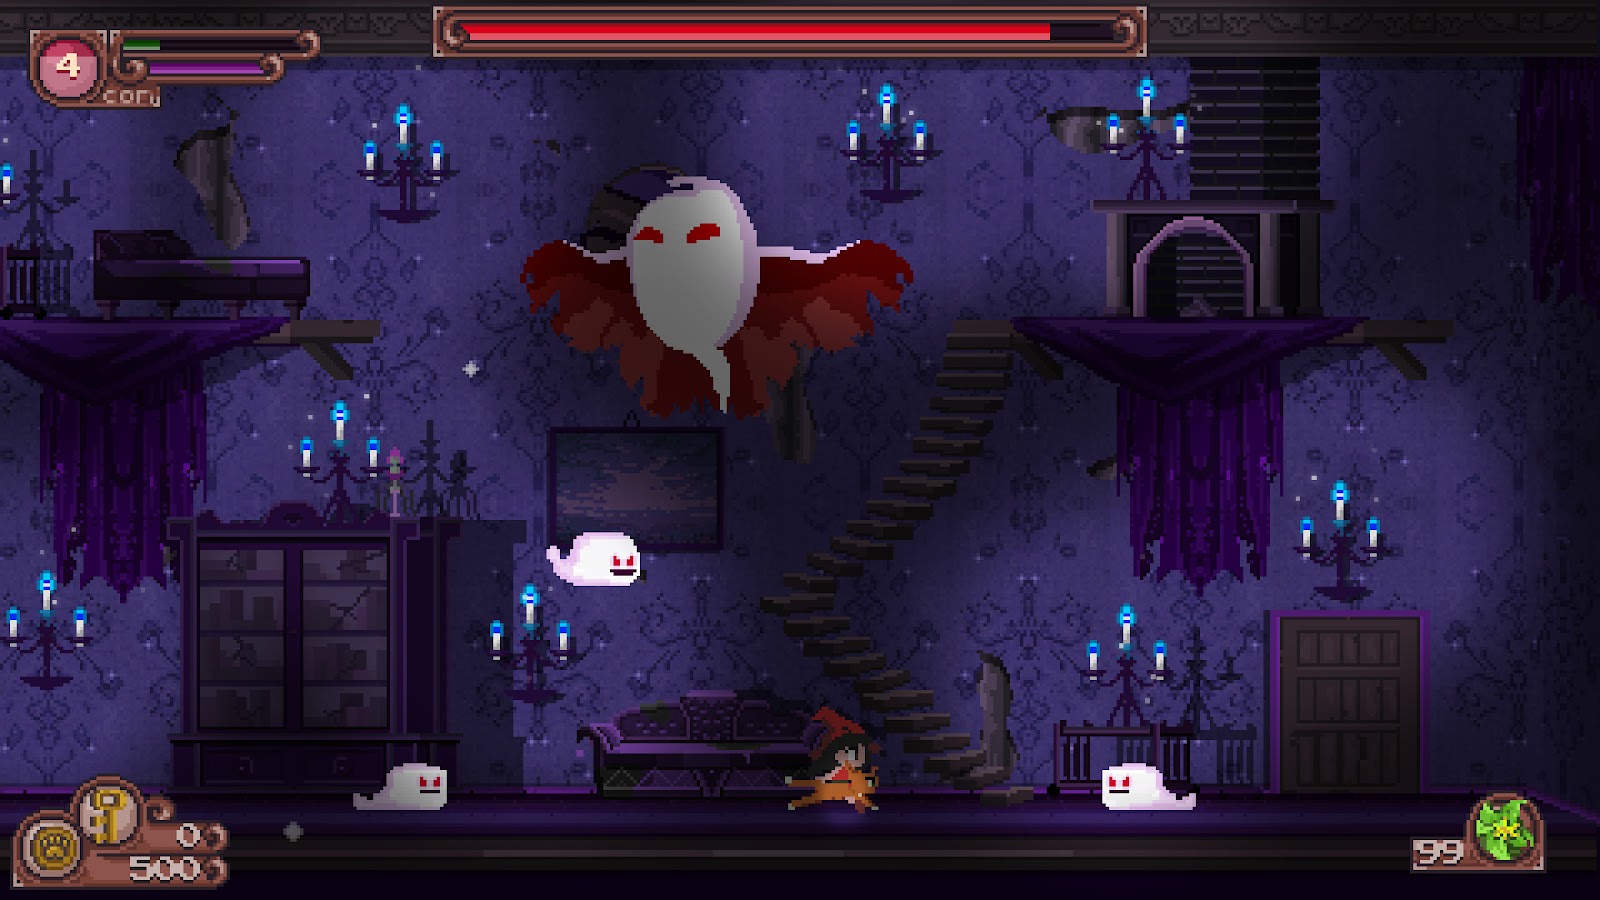 A spooky level shown with ghosts and ominous lighting.